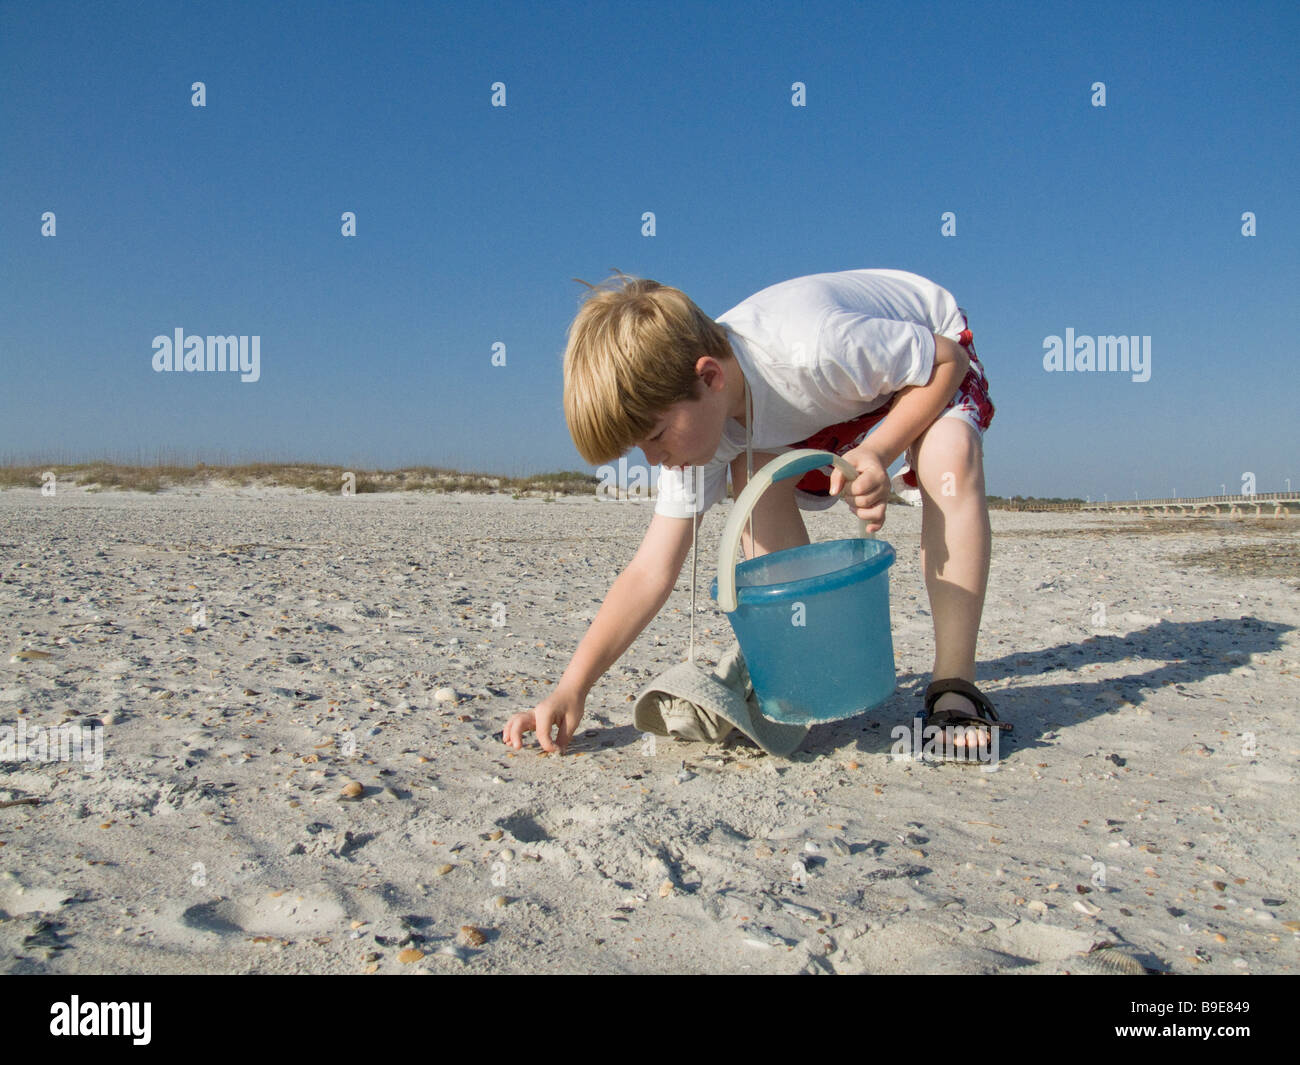 boy on beach with bucked collecting shells Stock Photo